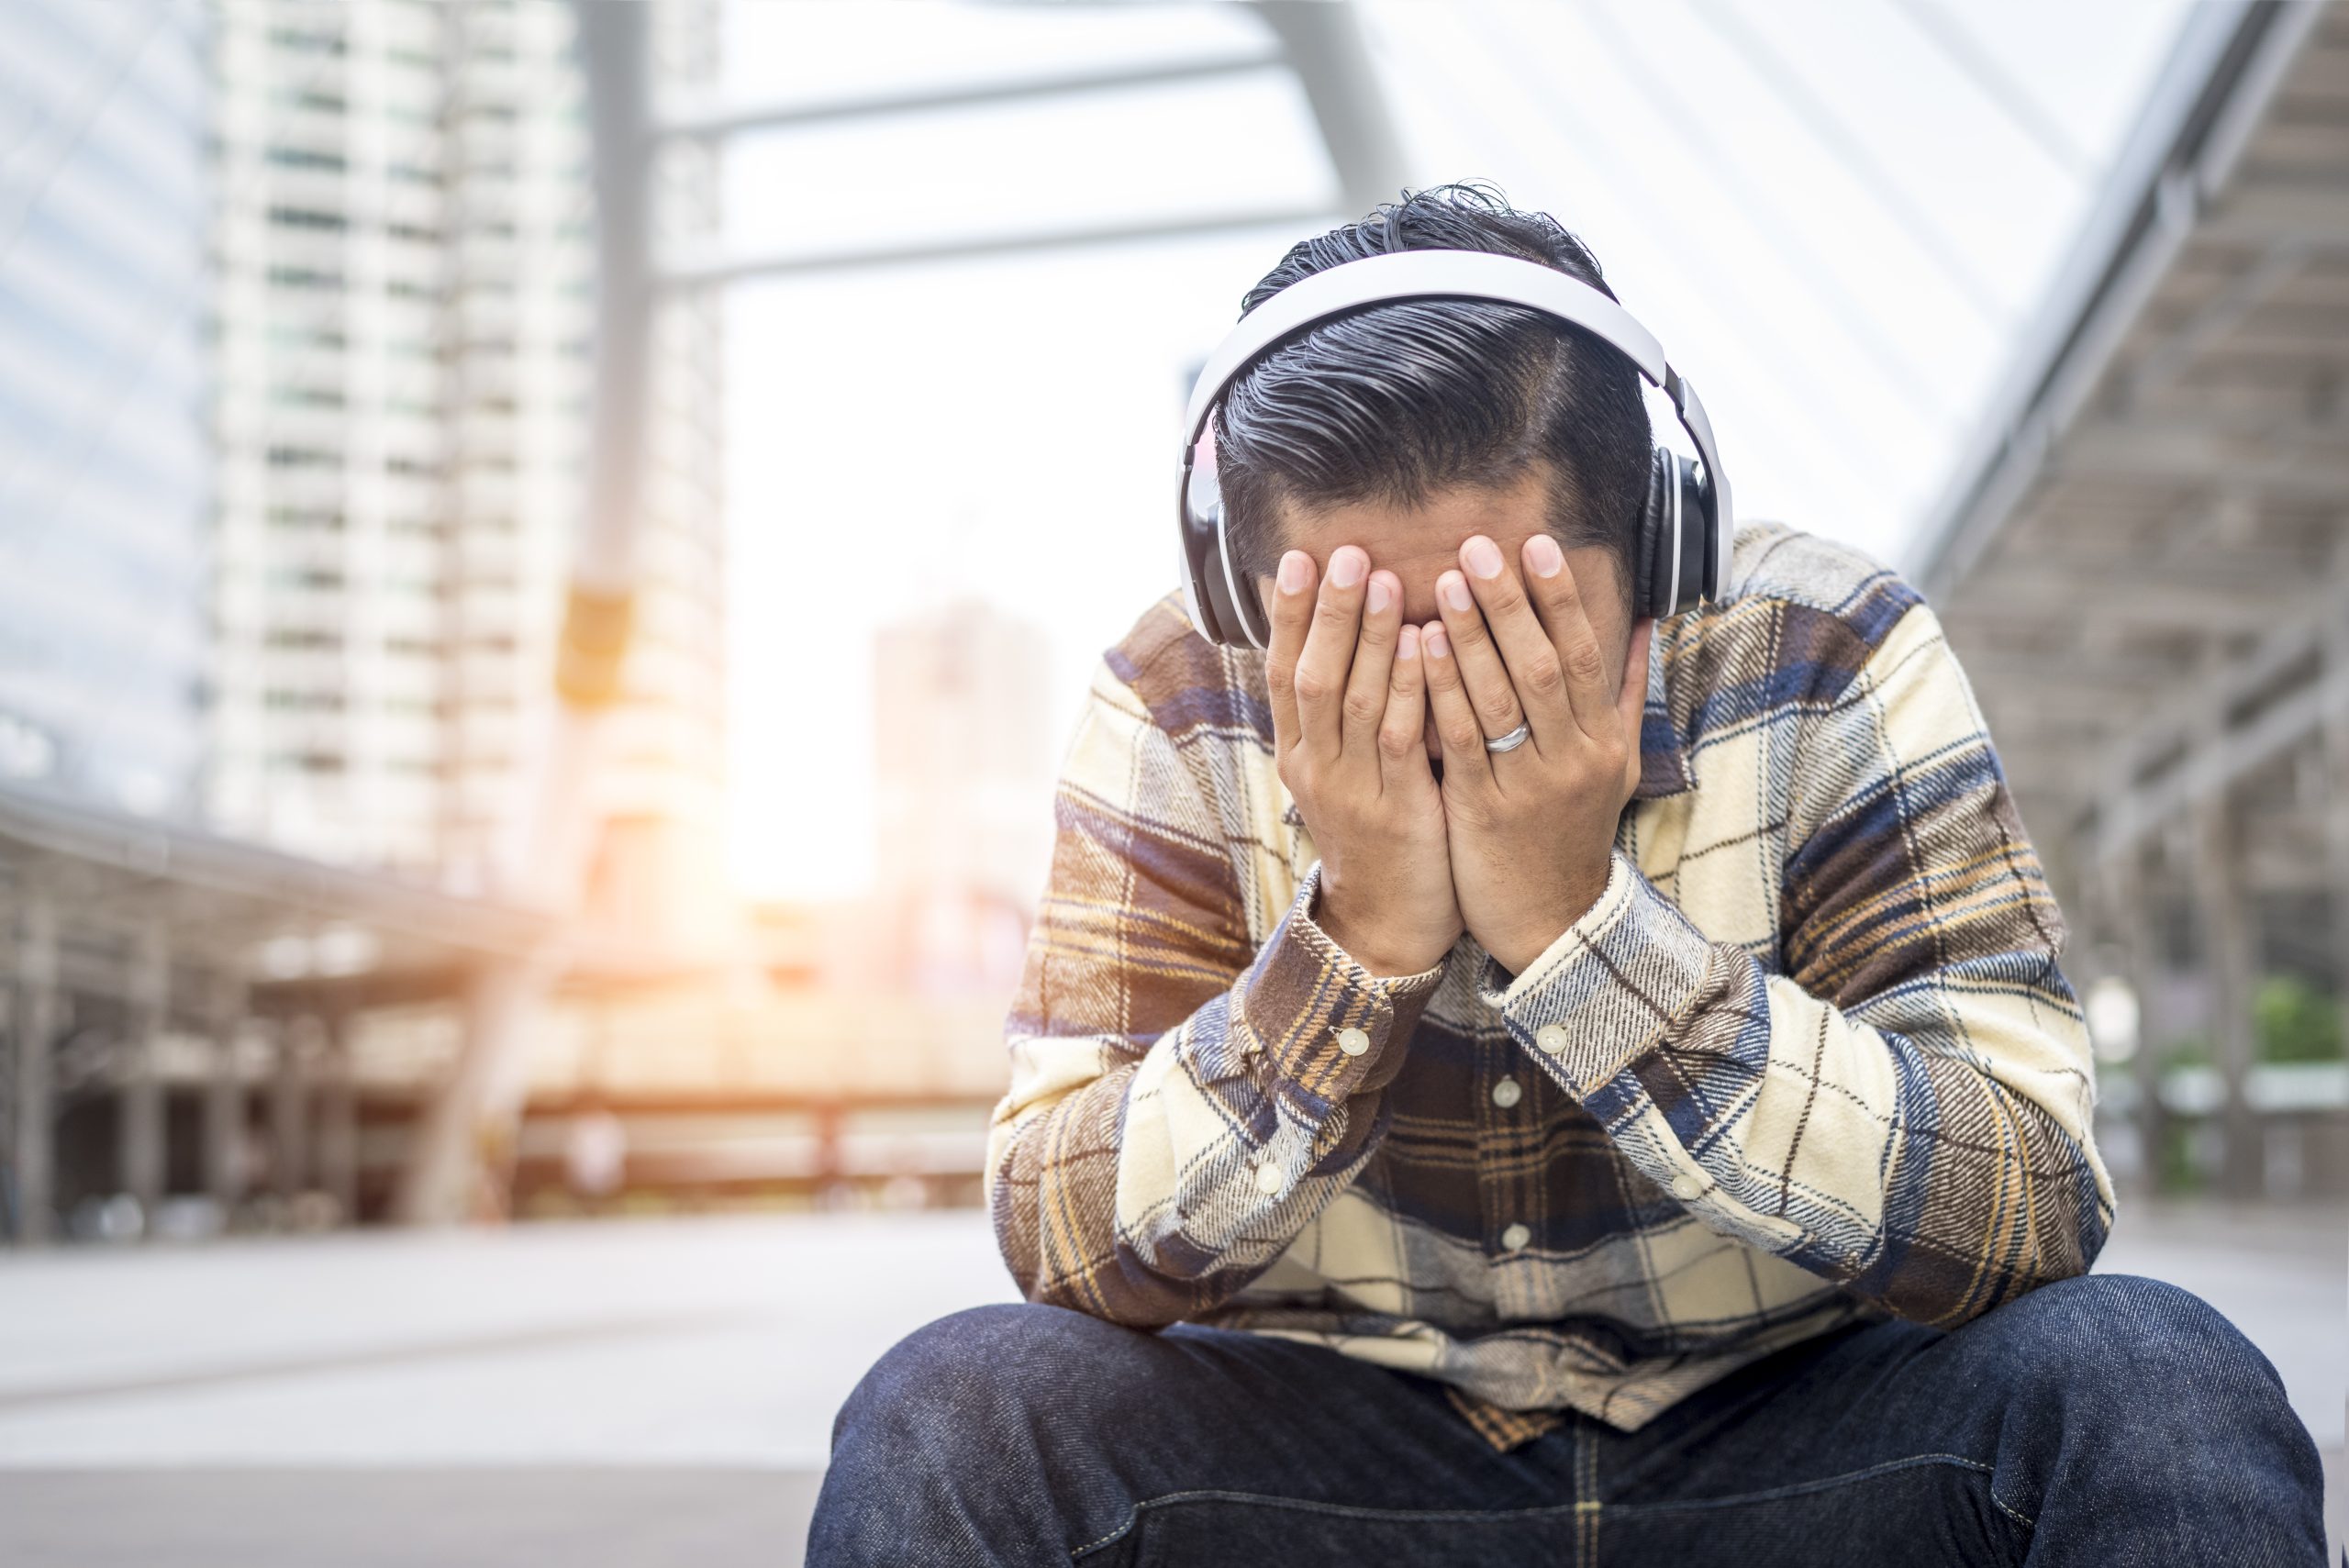 Study Shows Music Is Becoming More Negative